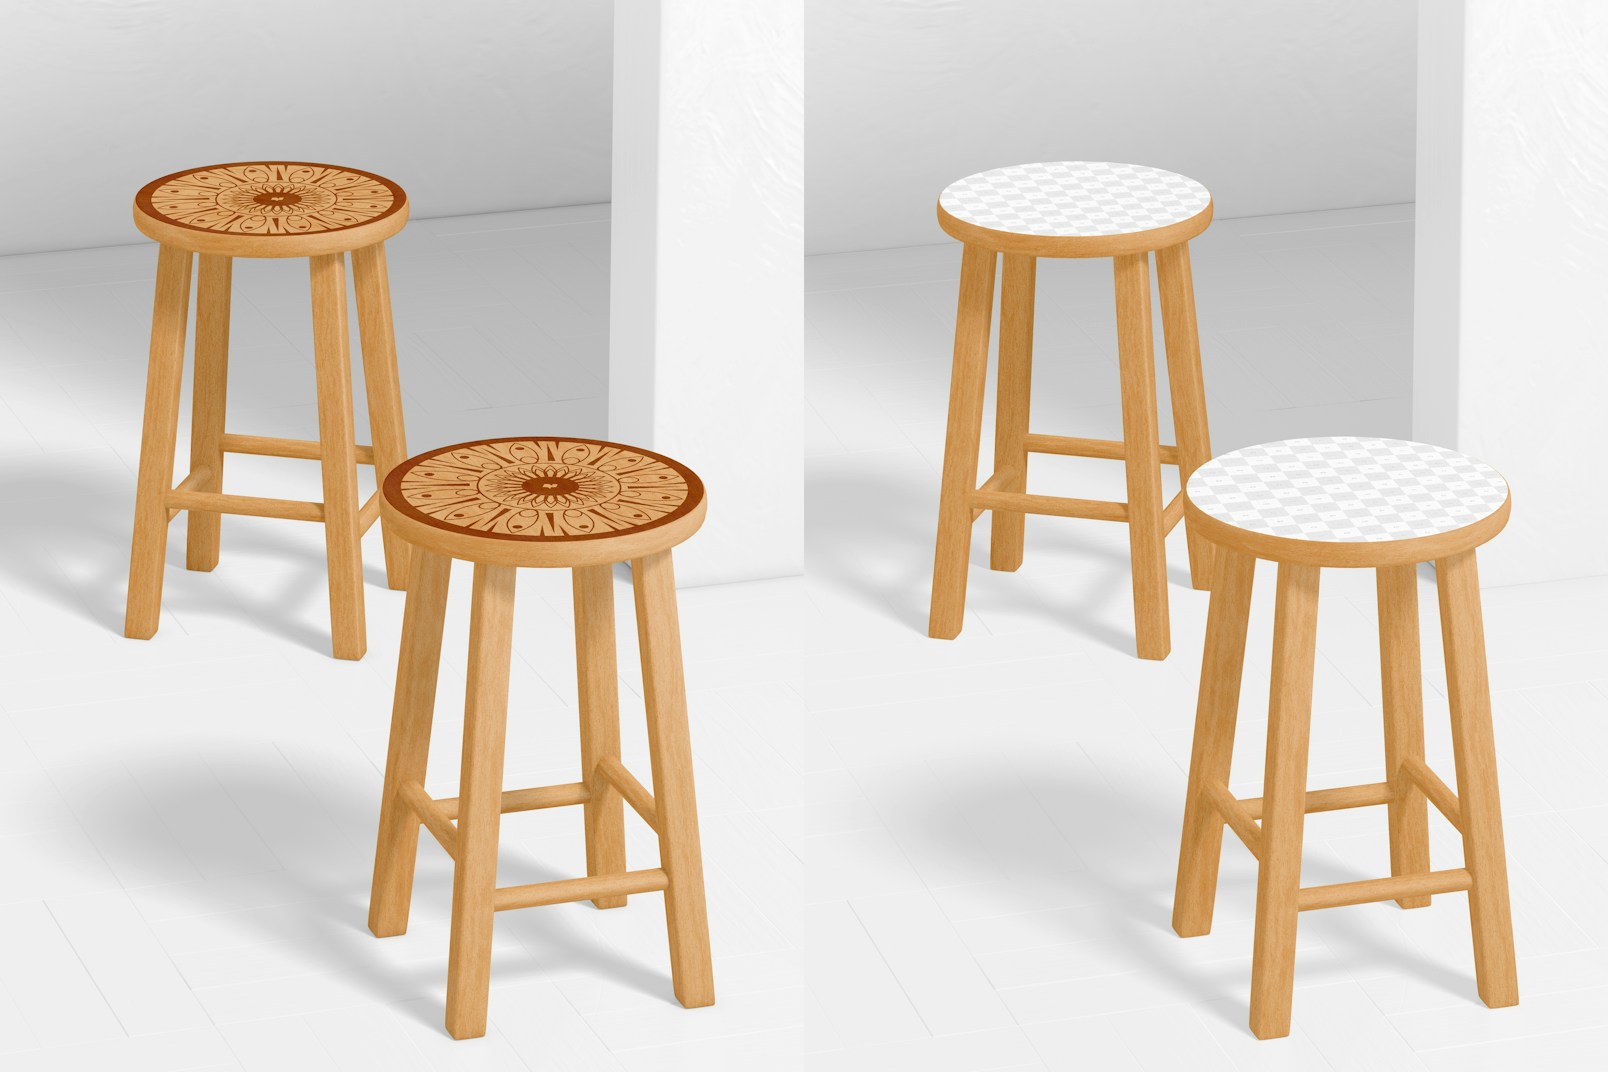 Round Wooden Stool Mockup, Perspective 02